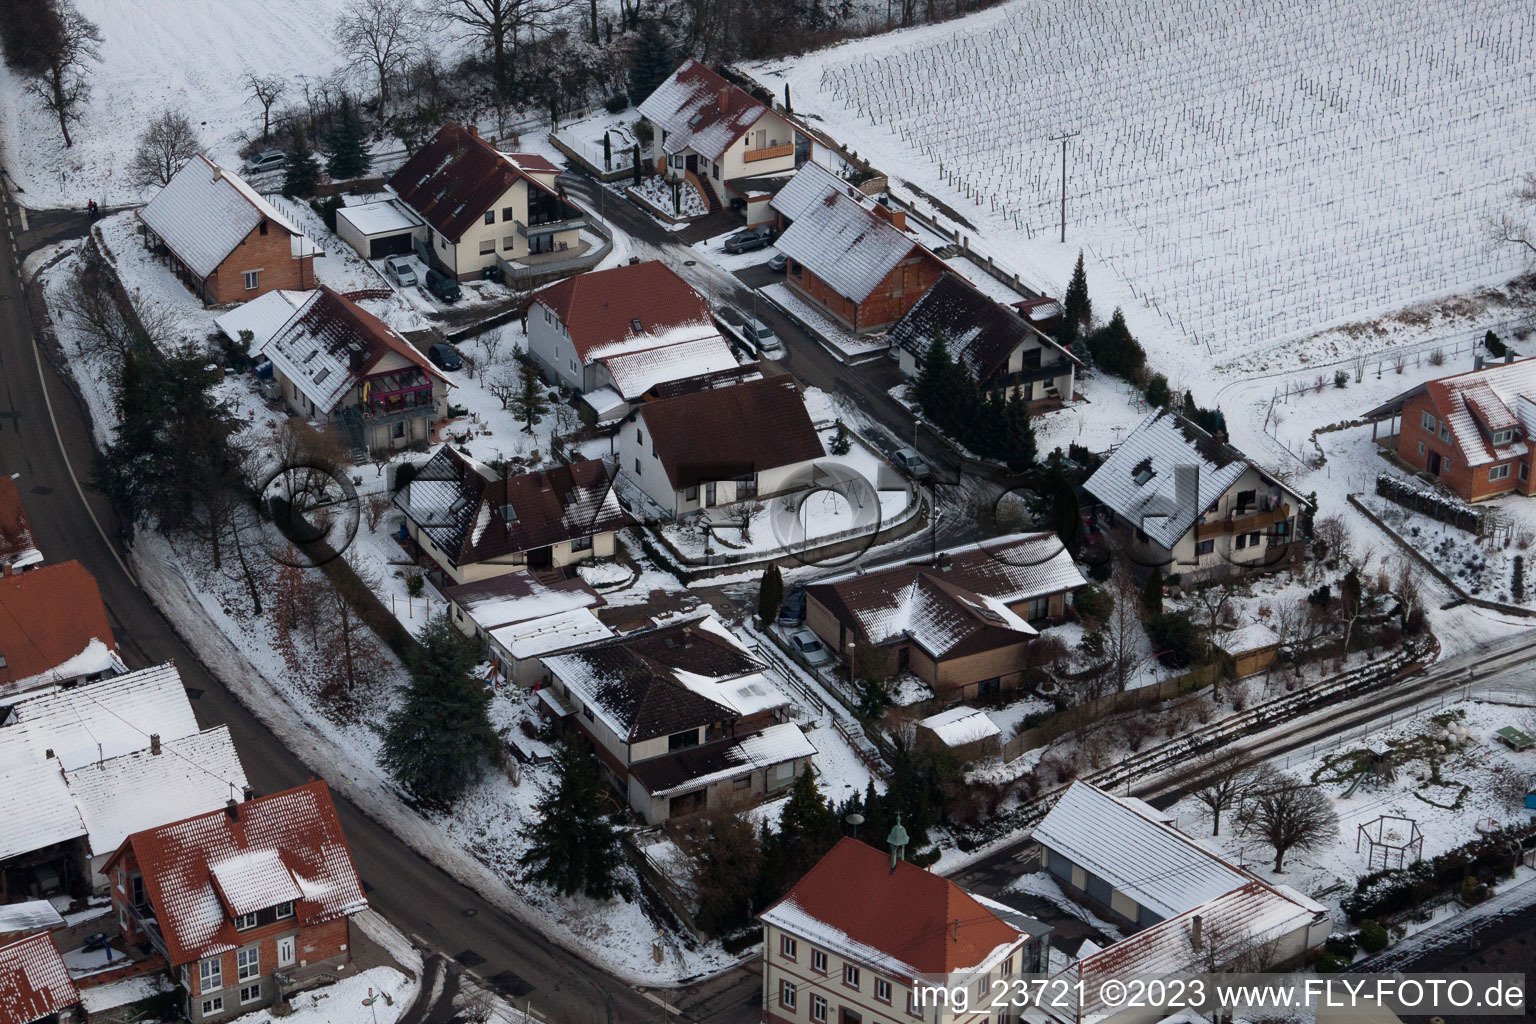 Drone image of Hergersweiler in the state Rhineland-Palatinate, Germany